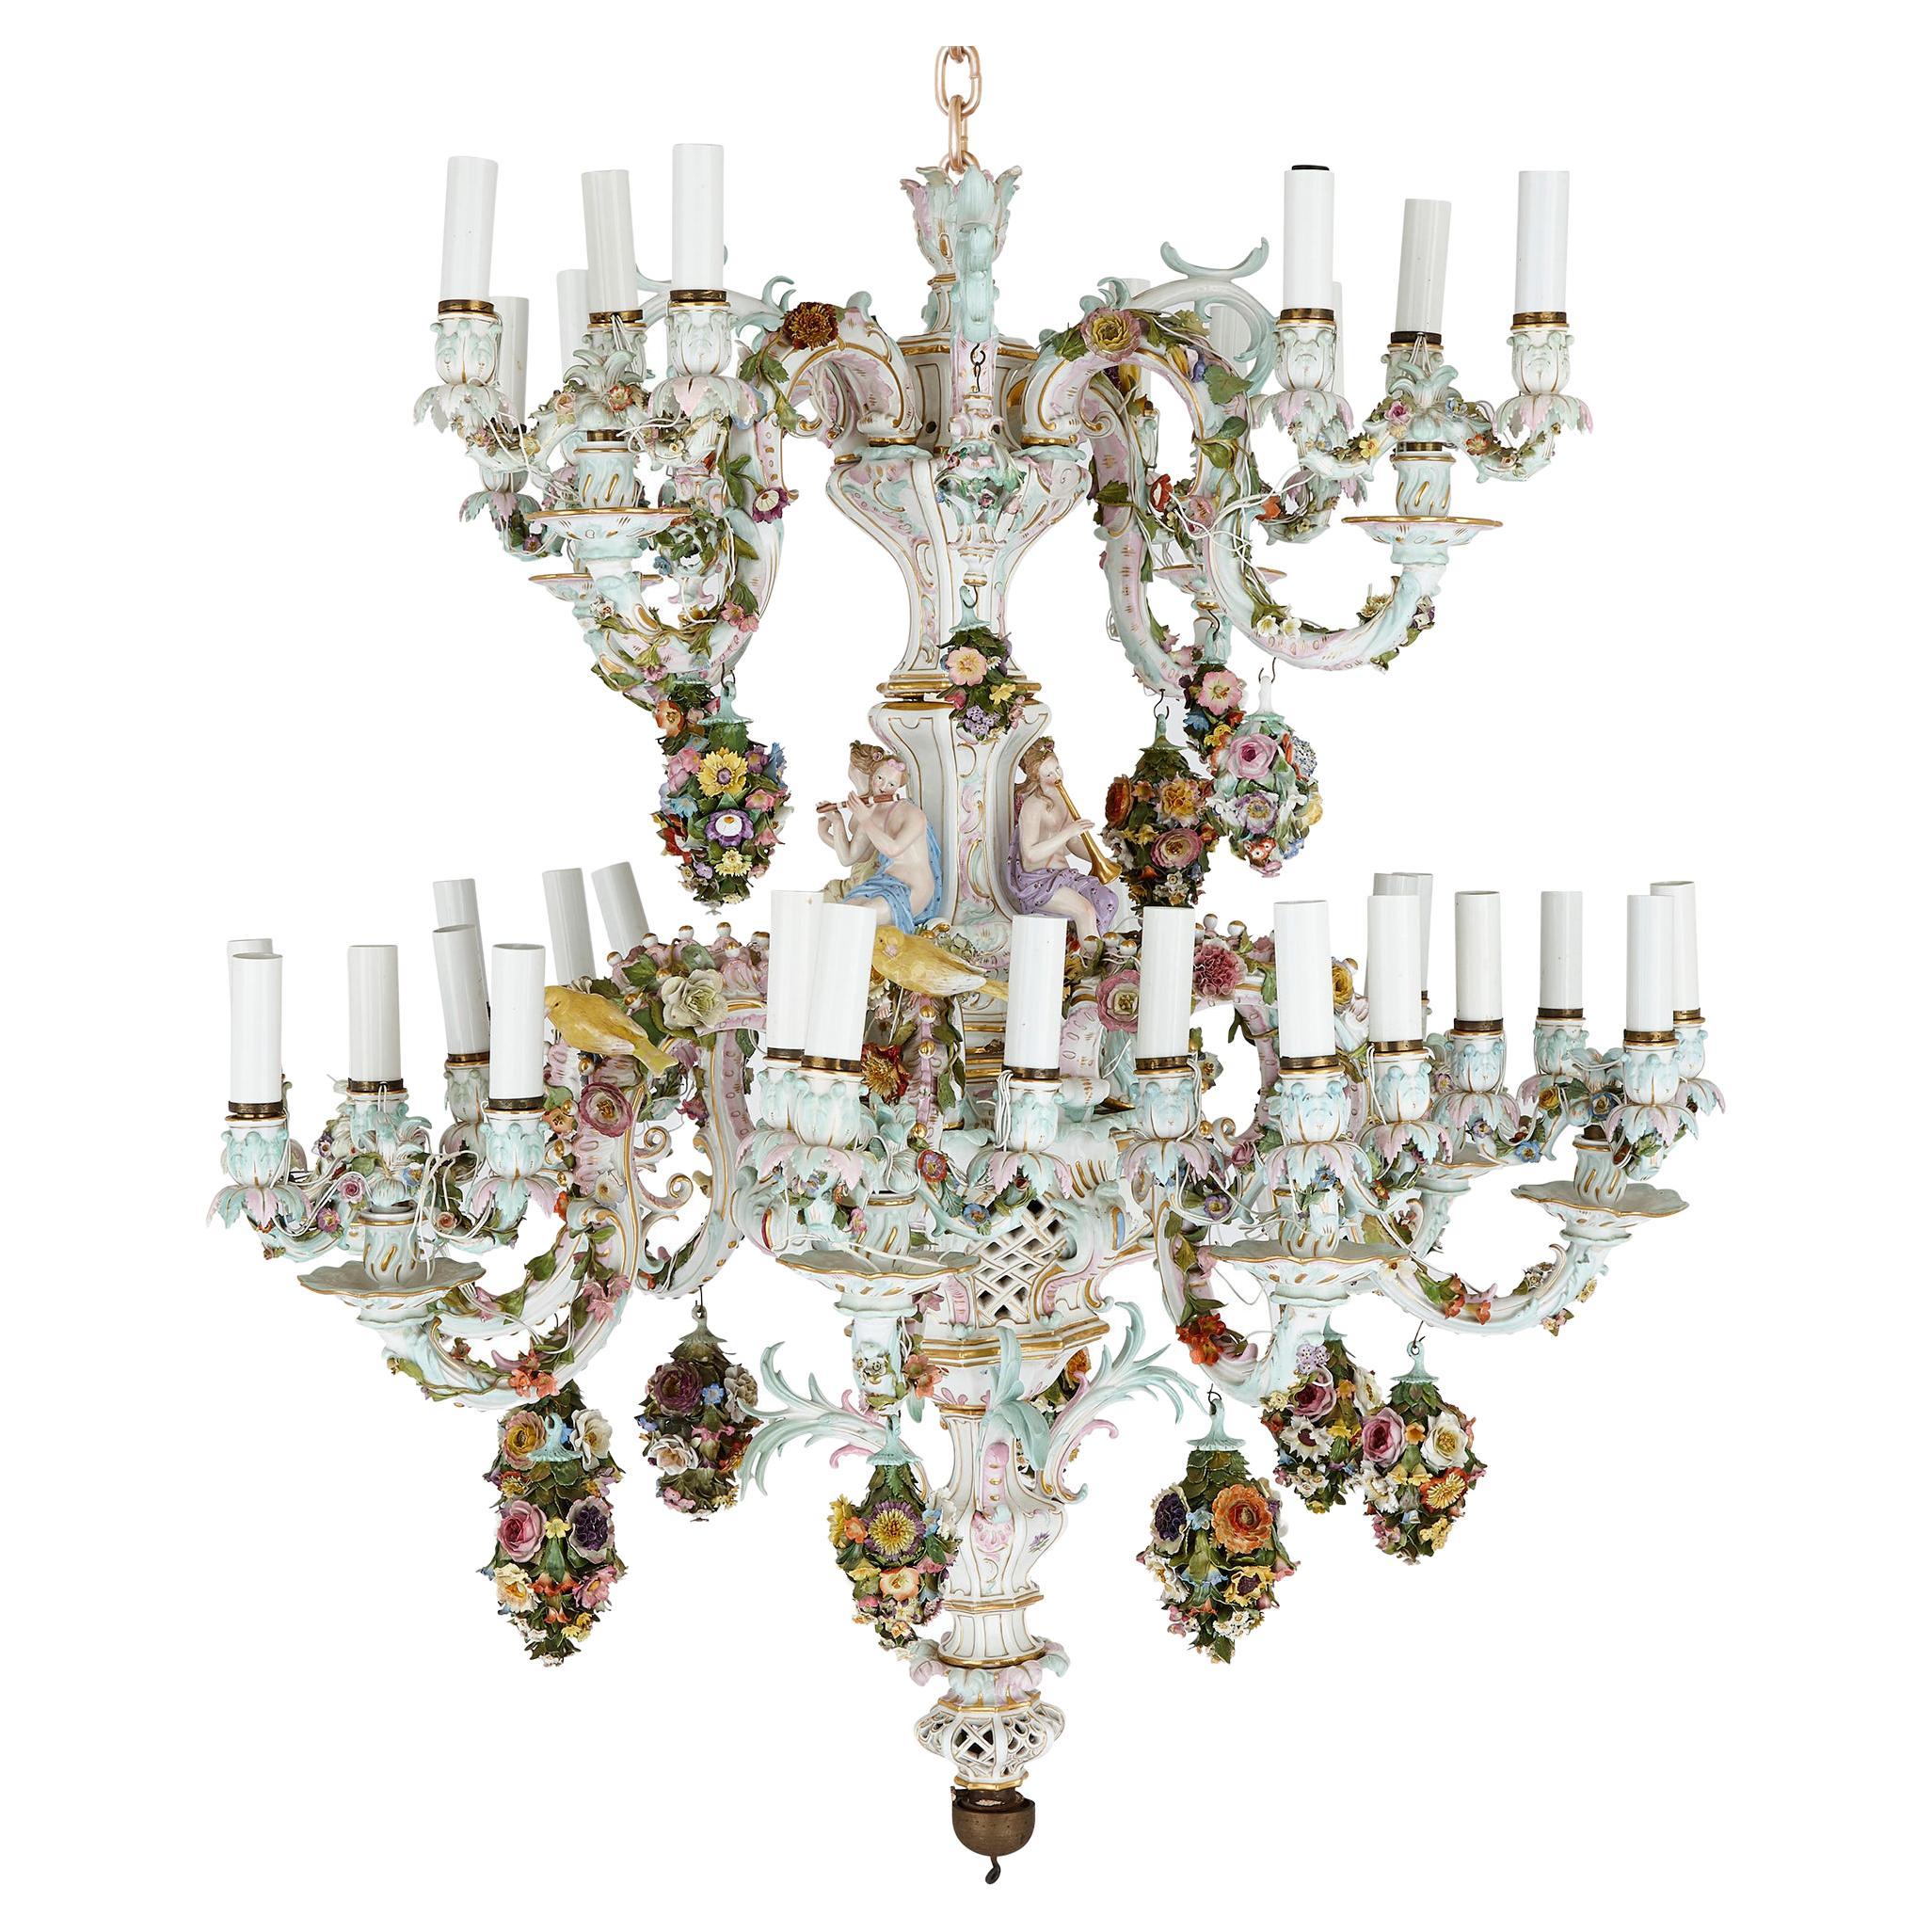 Large Rococo Style Porcelain Chandelier by Meissen